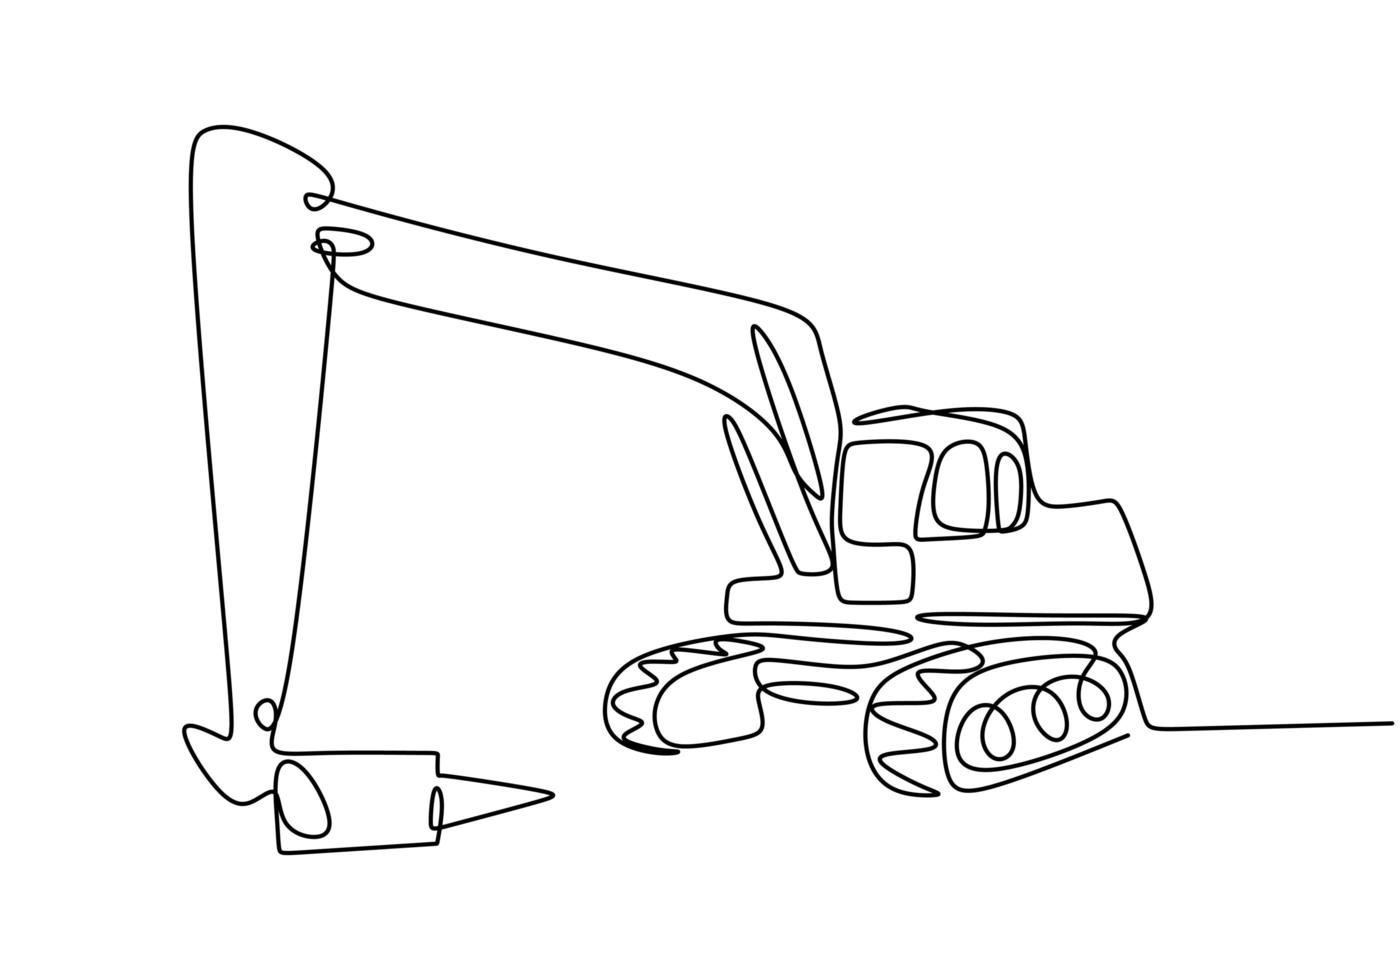 Continuous line art or one line drawing of construction backhoe vehicle. vector